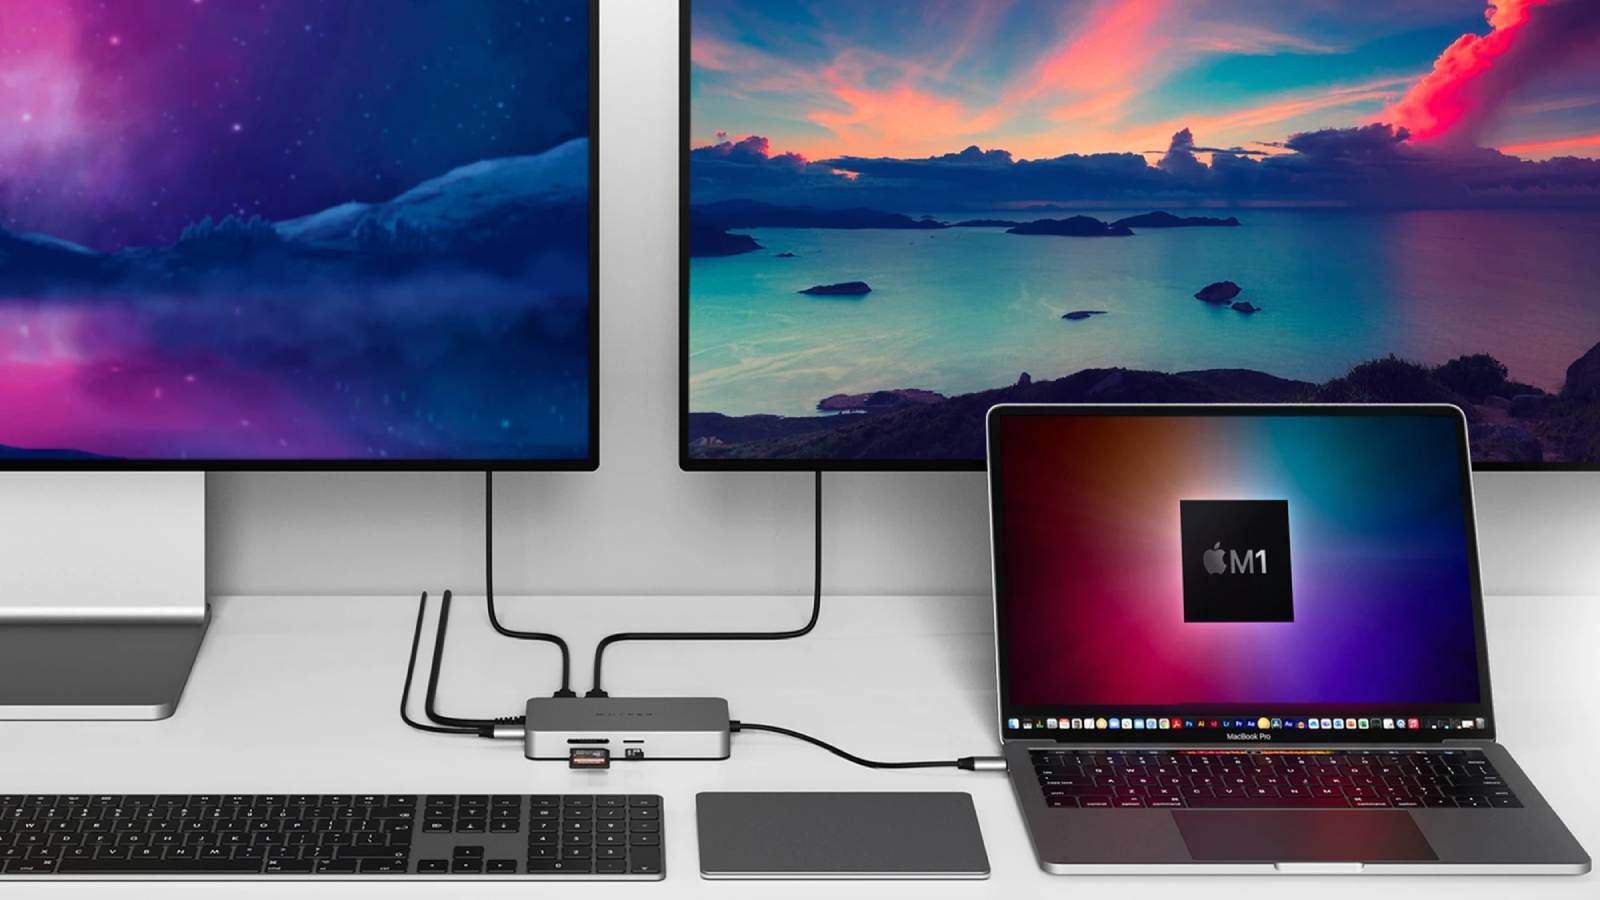 Apple's new 2021 MacBook Pro only comes with an HDMI 2.0 port which cannot  output 4K at 120Hz on an external display -  News